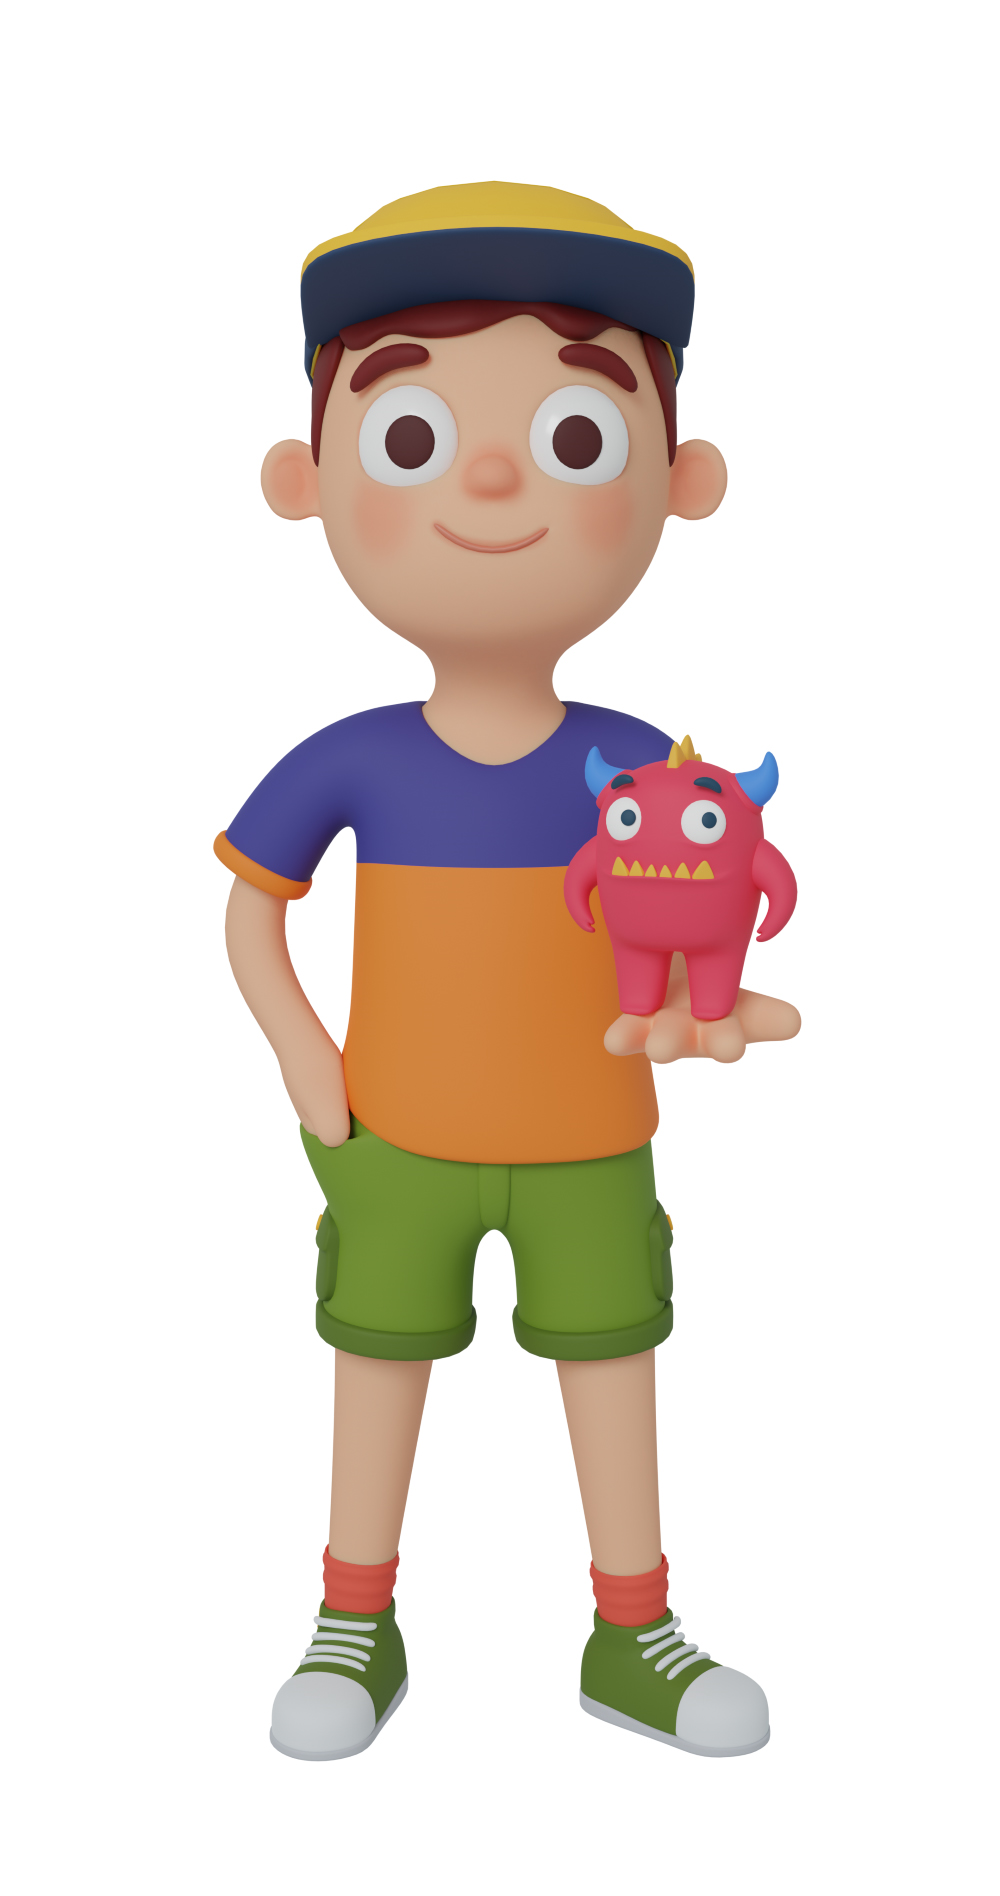 3d character design of a boy standing up